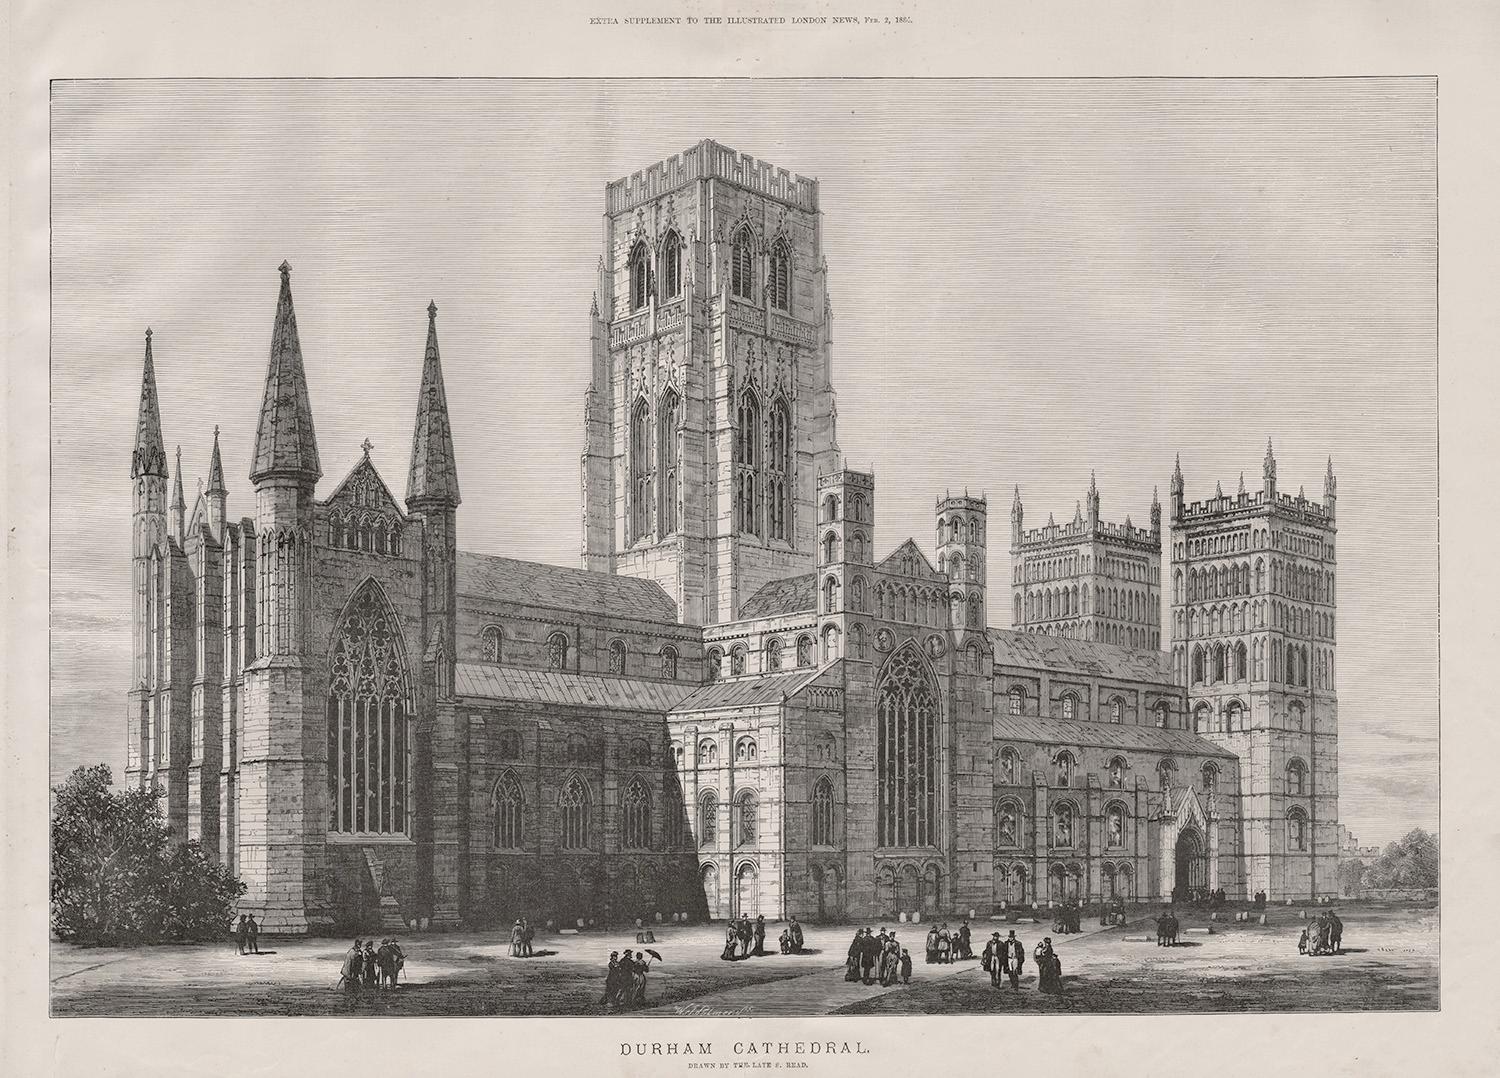 'Durham Cathedral'

Wood-engraving after Samuel Read. From 'The Illustrated London News'. 

Samuel Read was an English illustrator who provided many illustrations for the Illustrated London News.

405mm by 550mm (sheet) 